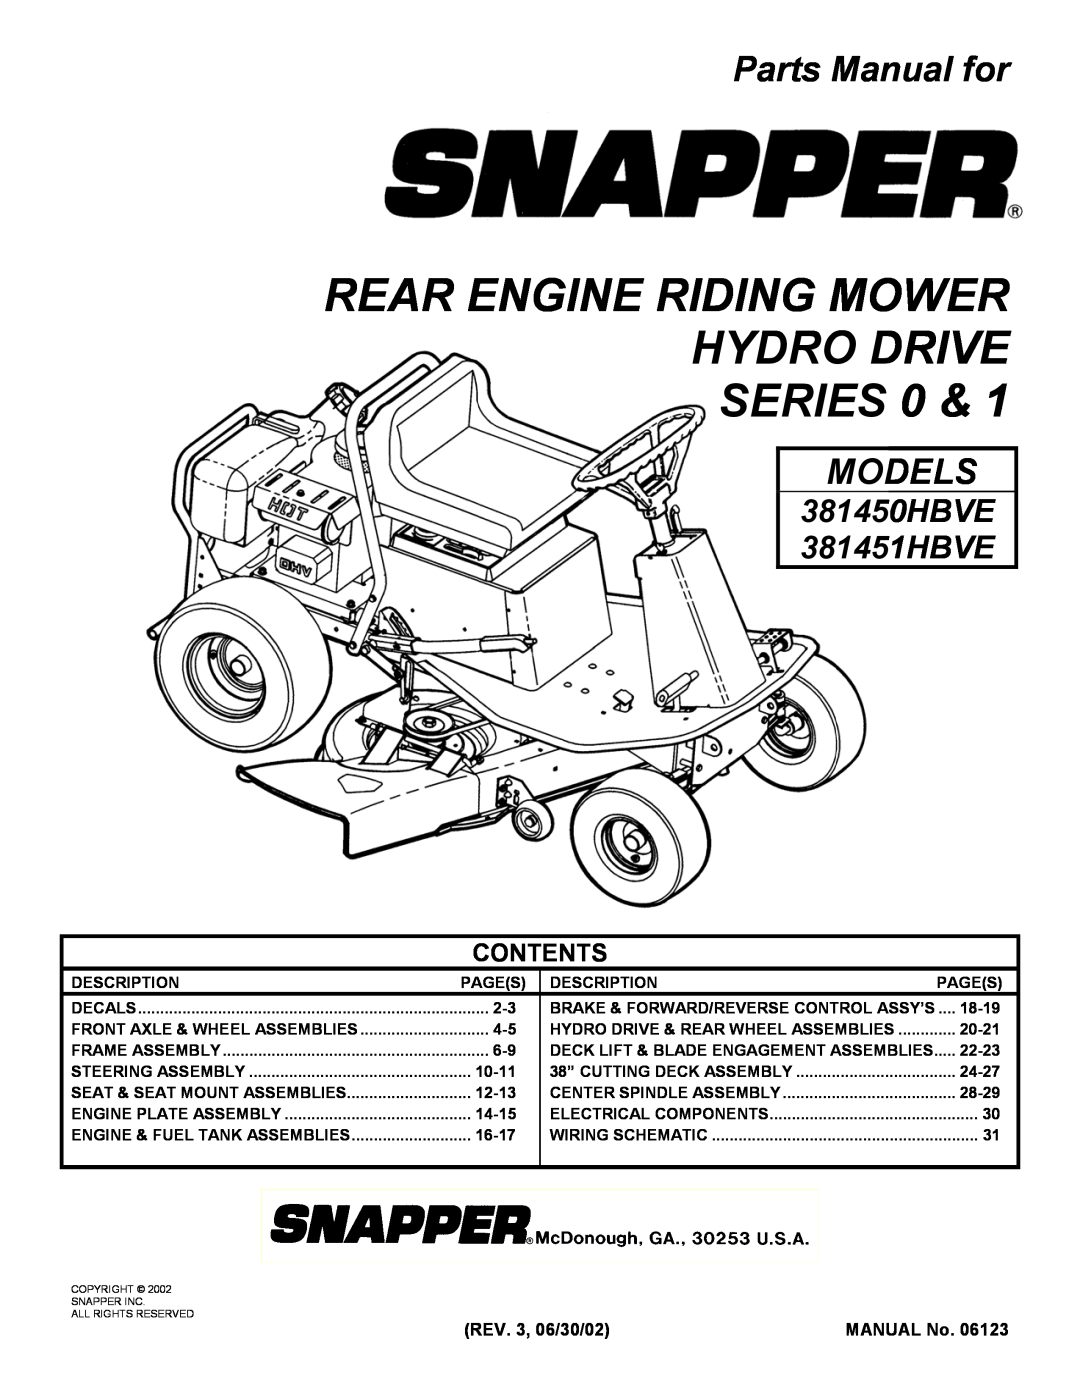 Snapper 381450HBVE manual Parts Manual for, Models, Contents, Rear Engine Riding Mower Hydro Drive Series 